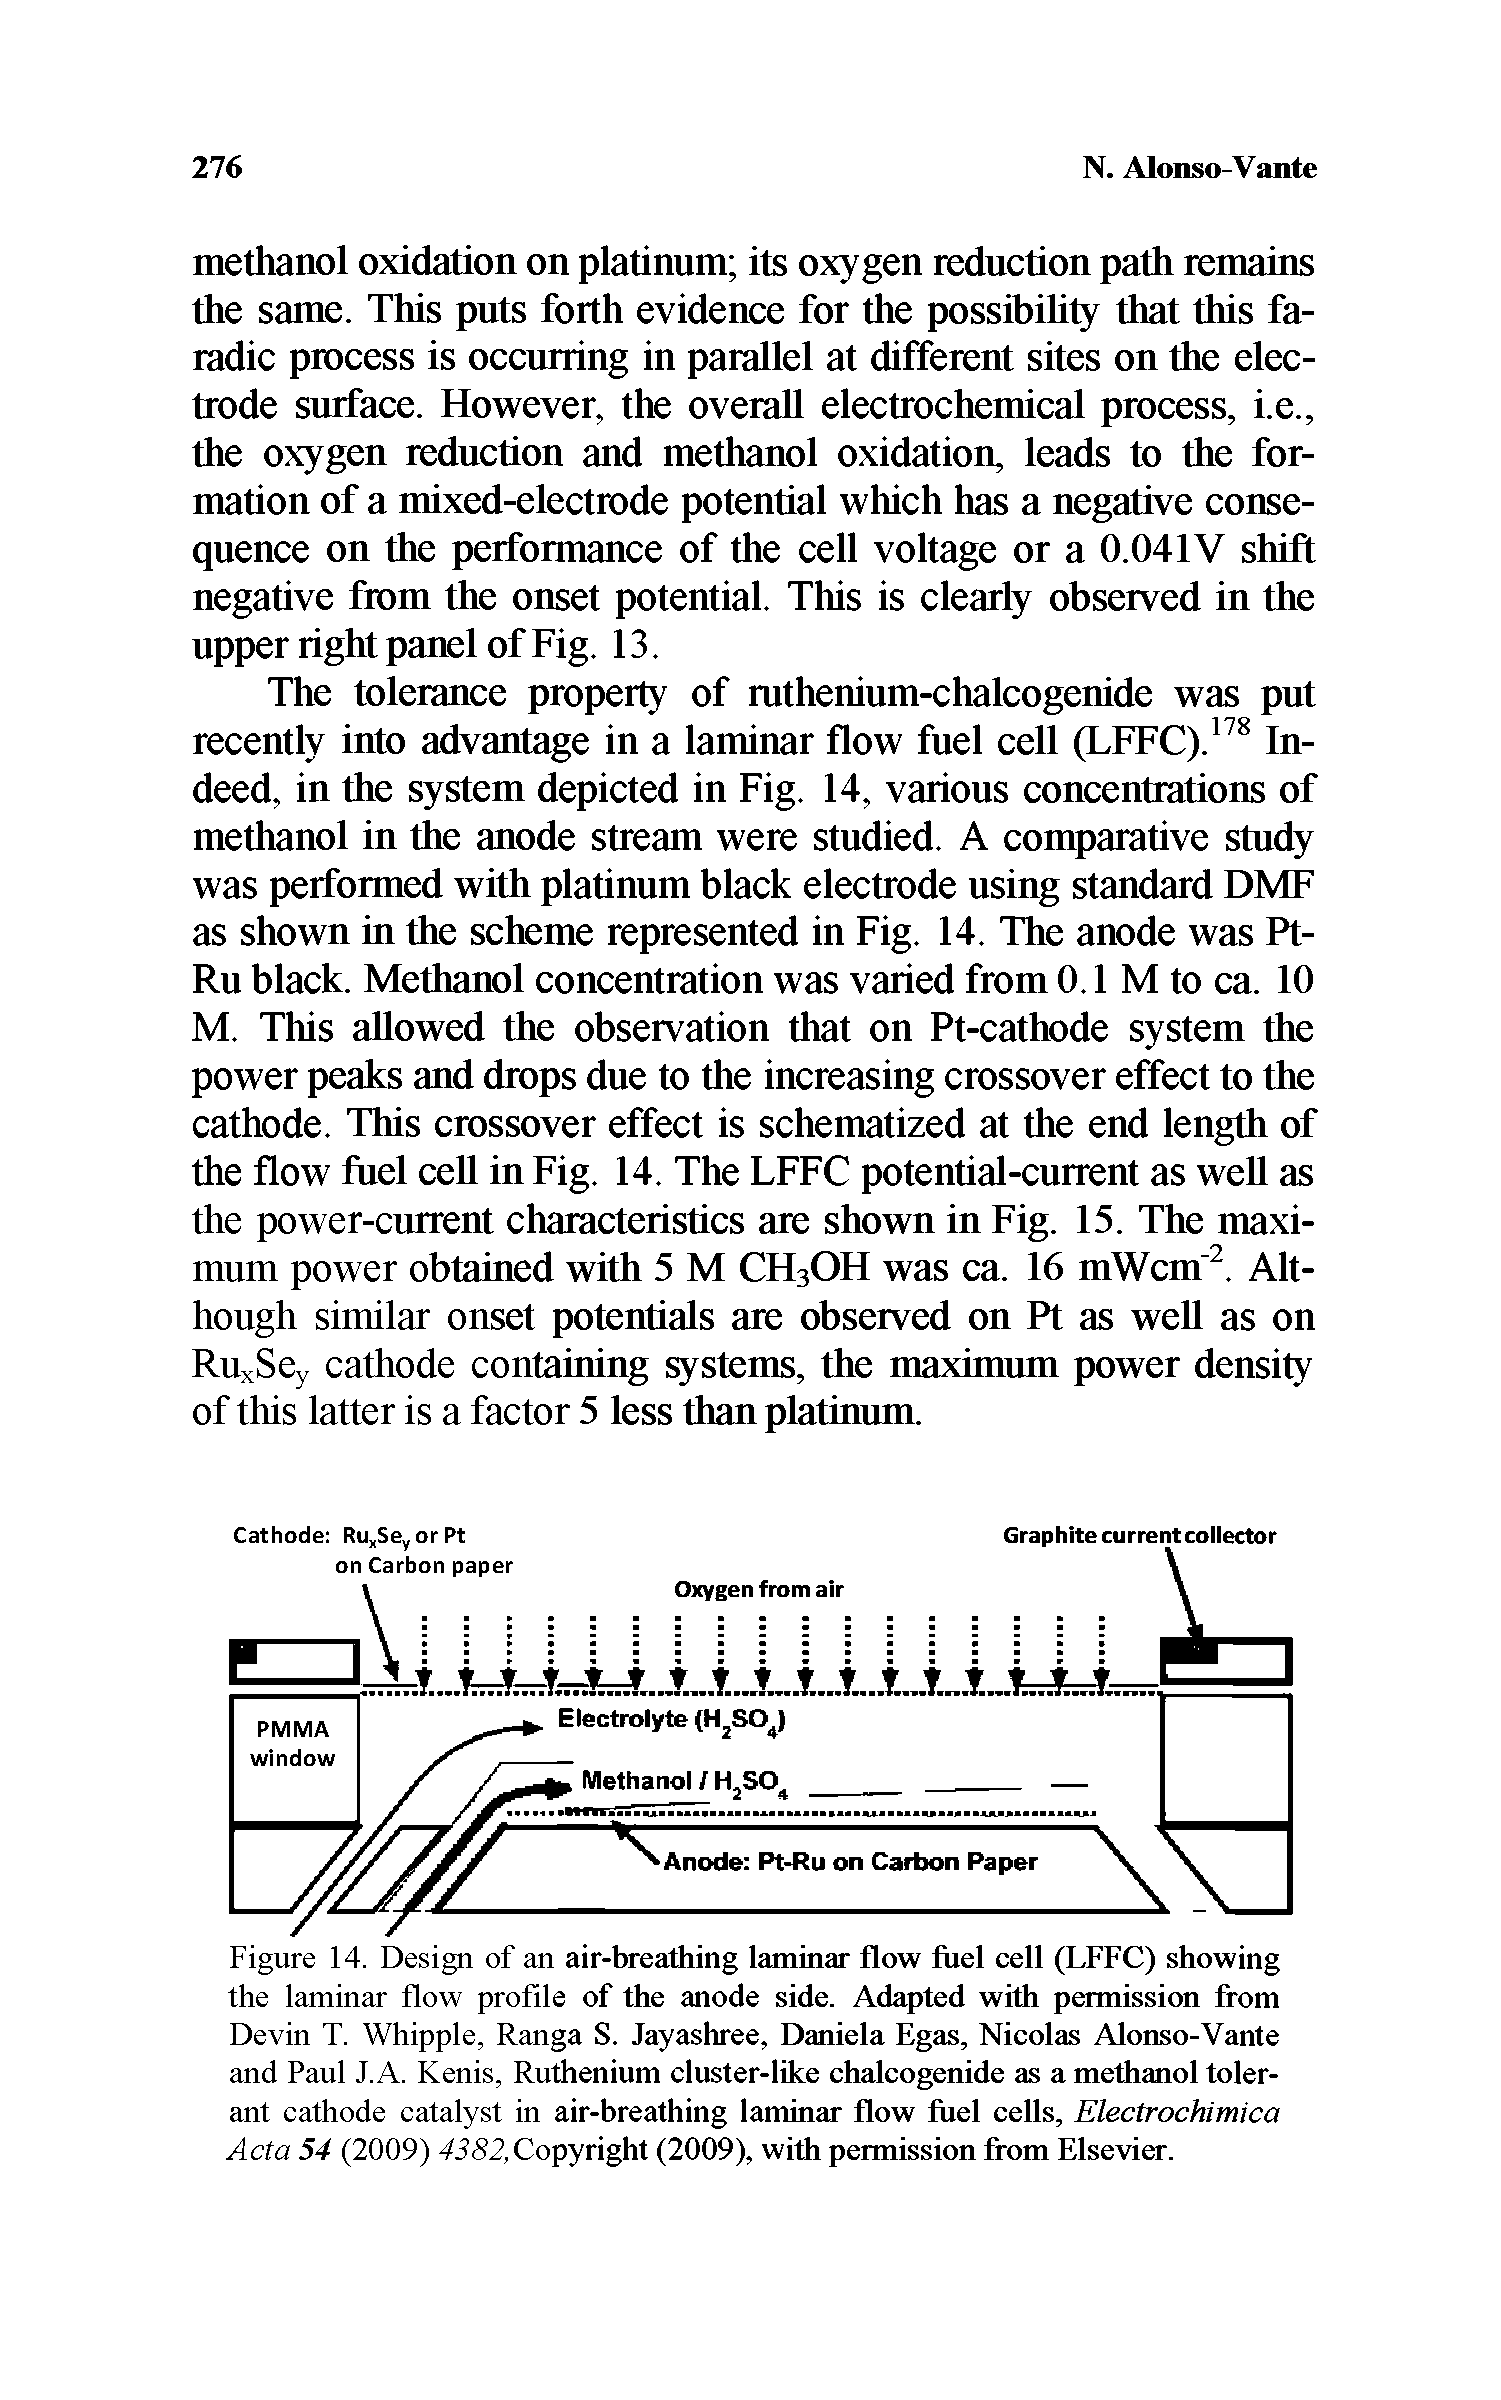 Figure 14. Design of an air-breathing laminar flow fuel cell (LFFC) showing the laminar flow profile of the anode side. Adapted with permission from Devin T. Whipple, Ranga S. Jayashree, Daniela Egas, Nicolas Alonso-Vante and Paul J.A. Kenis, Ruthenium cluster-like chalcogenide as a methanol tolerant cathode catalyst in air-breathing laminar flow fuel cells. Electrochi mica Acta 54 (2009) Copyright (2009), with permission from Elsevier.